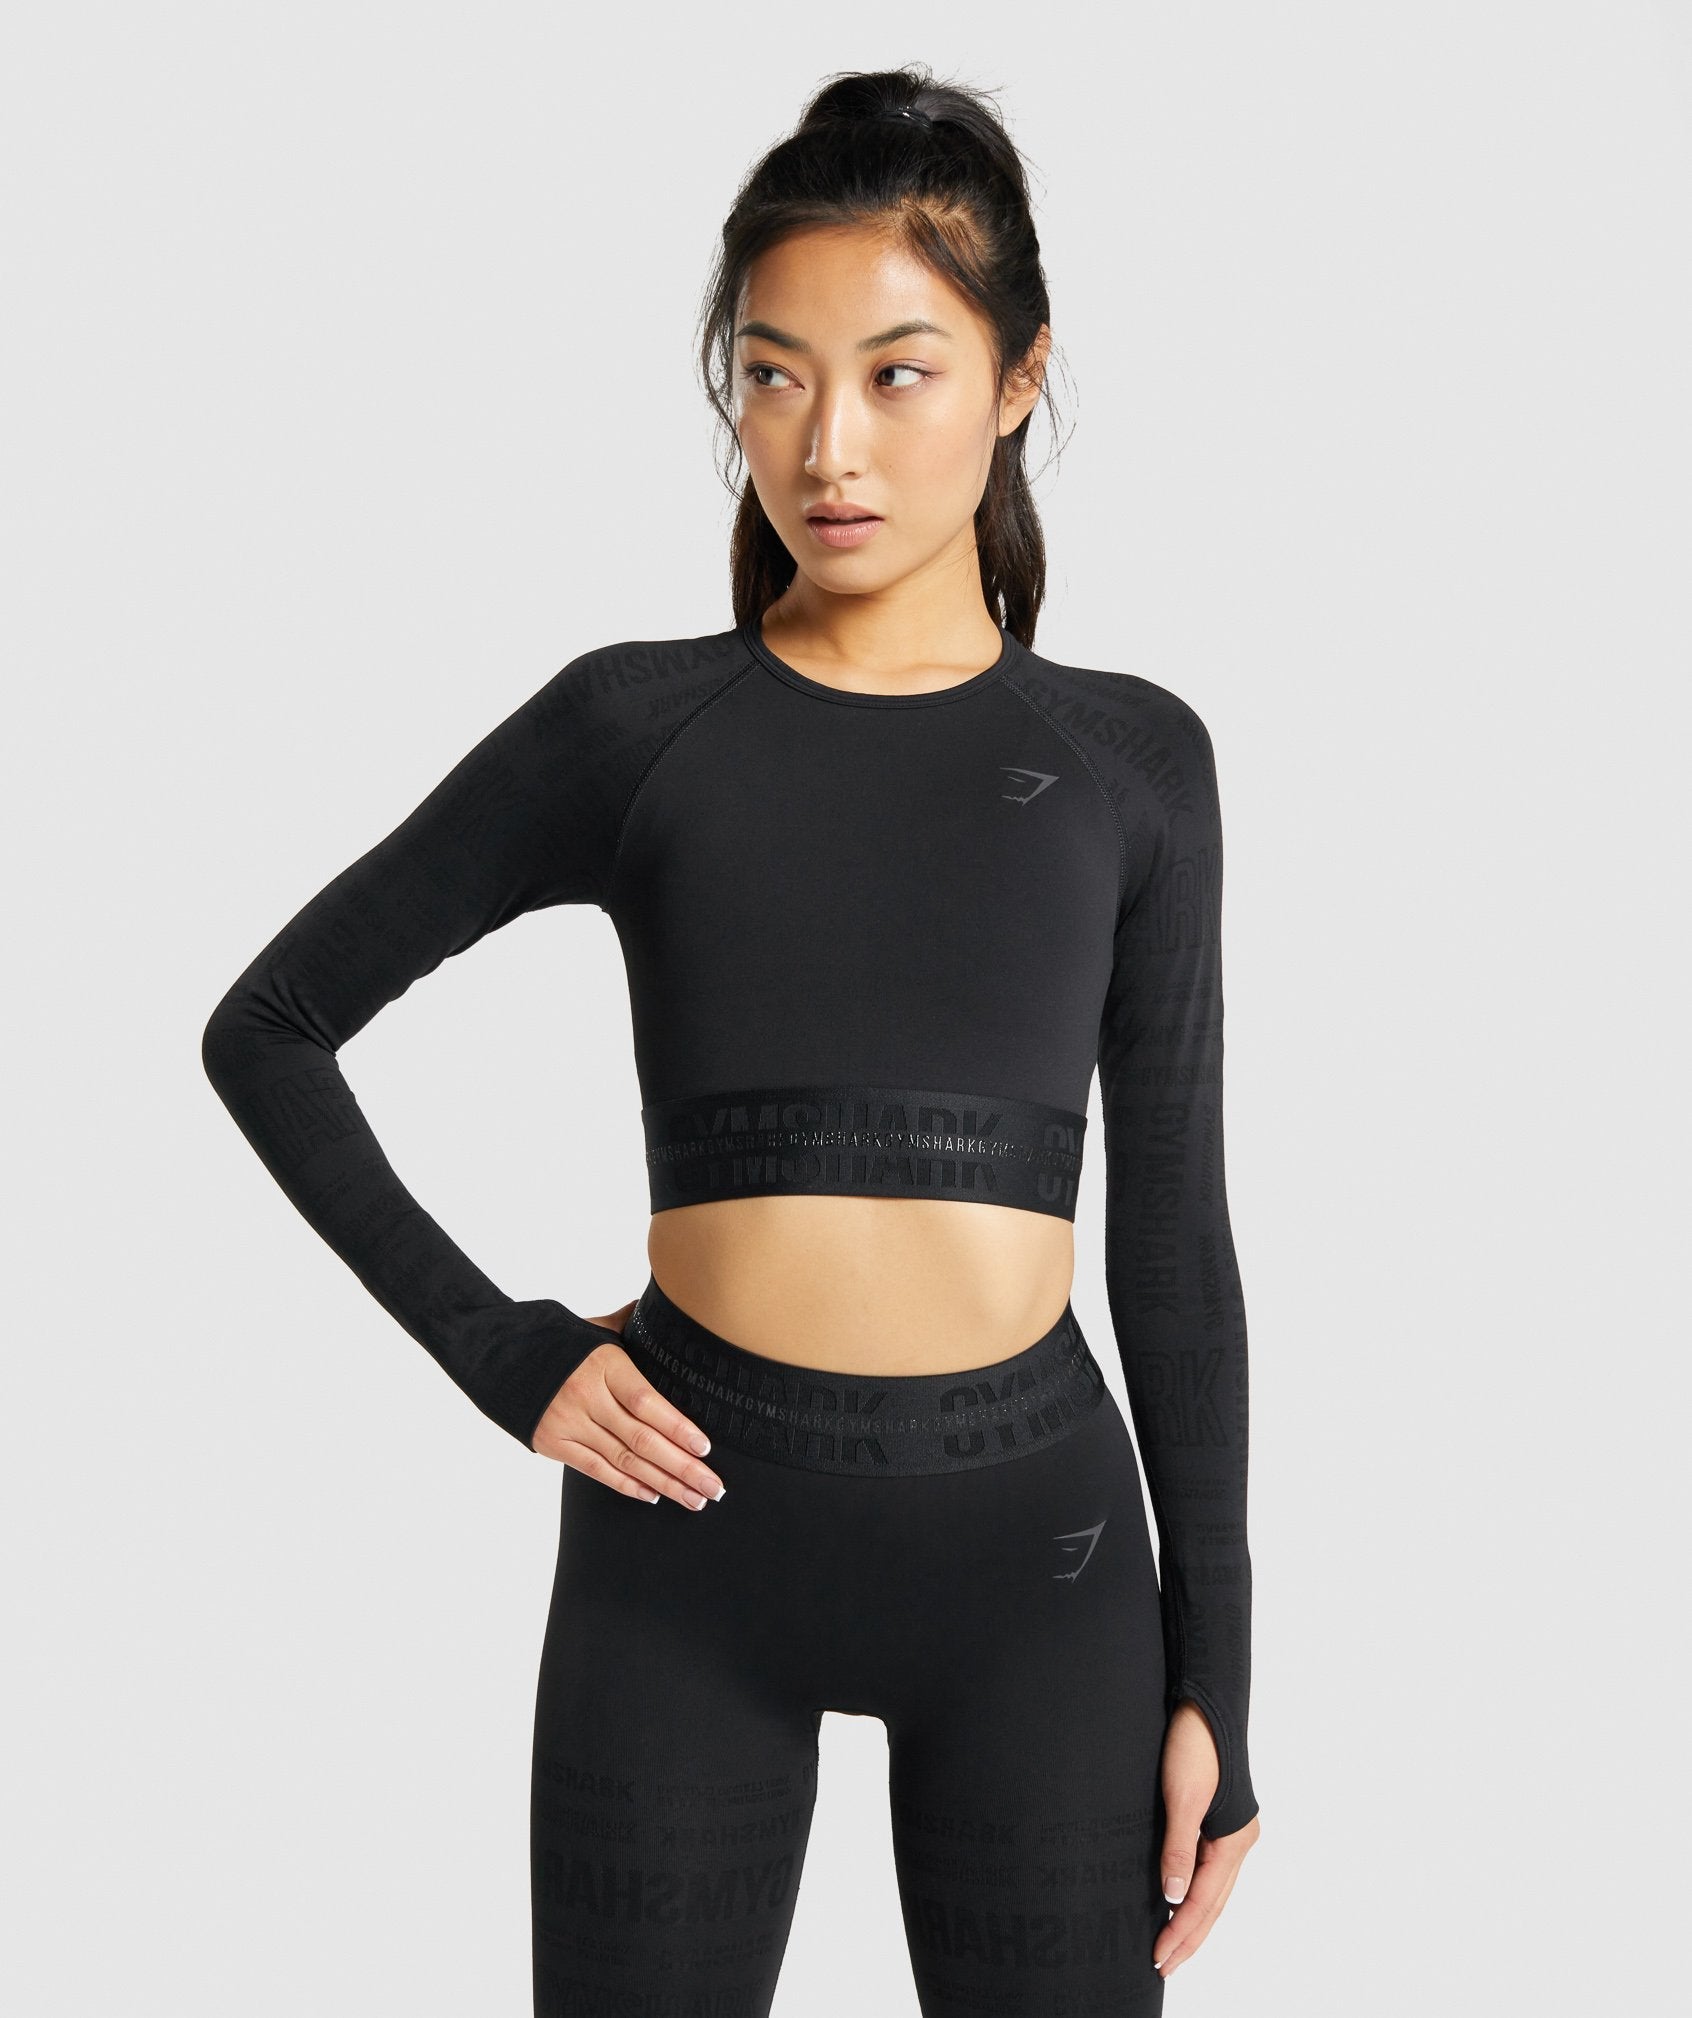 Gymshark Long Sleeve Ribbon Crop Top Blue - $25 (28% Off Retail) - From  Bailey